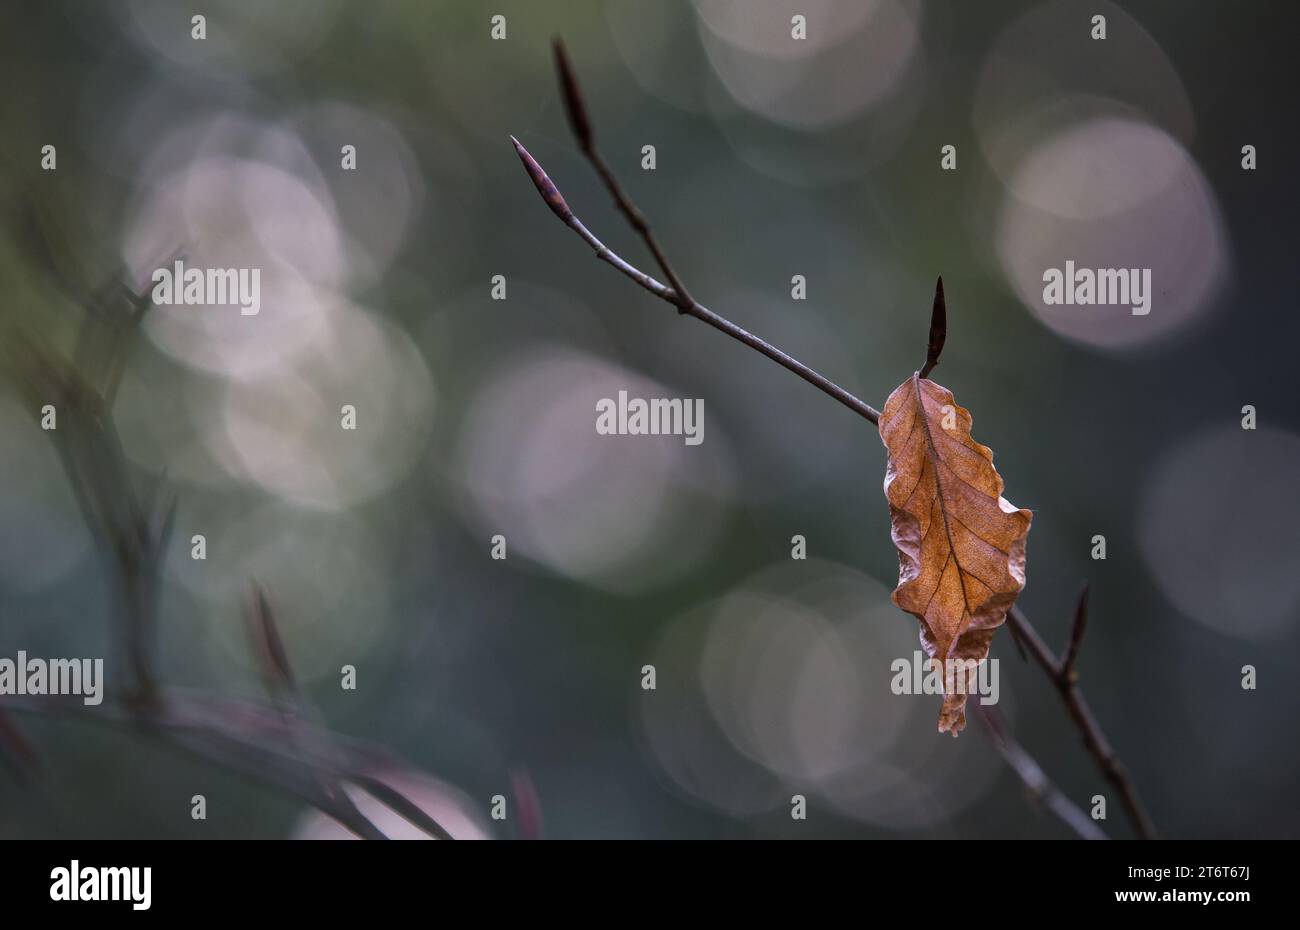 Single beech leaf hanging onto shrub with out of focus Bokeh highlights in background Stock Photo